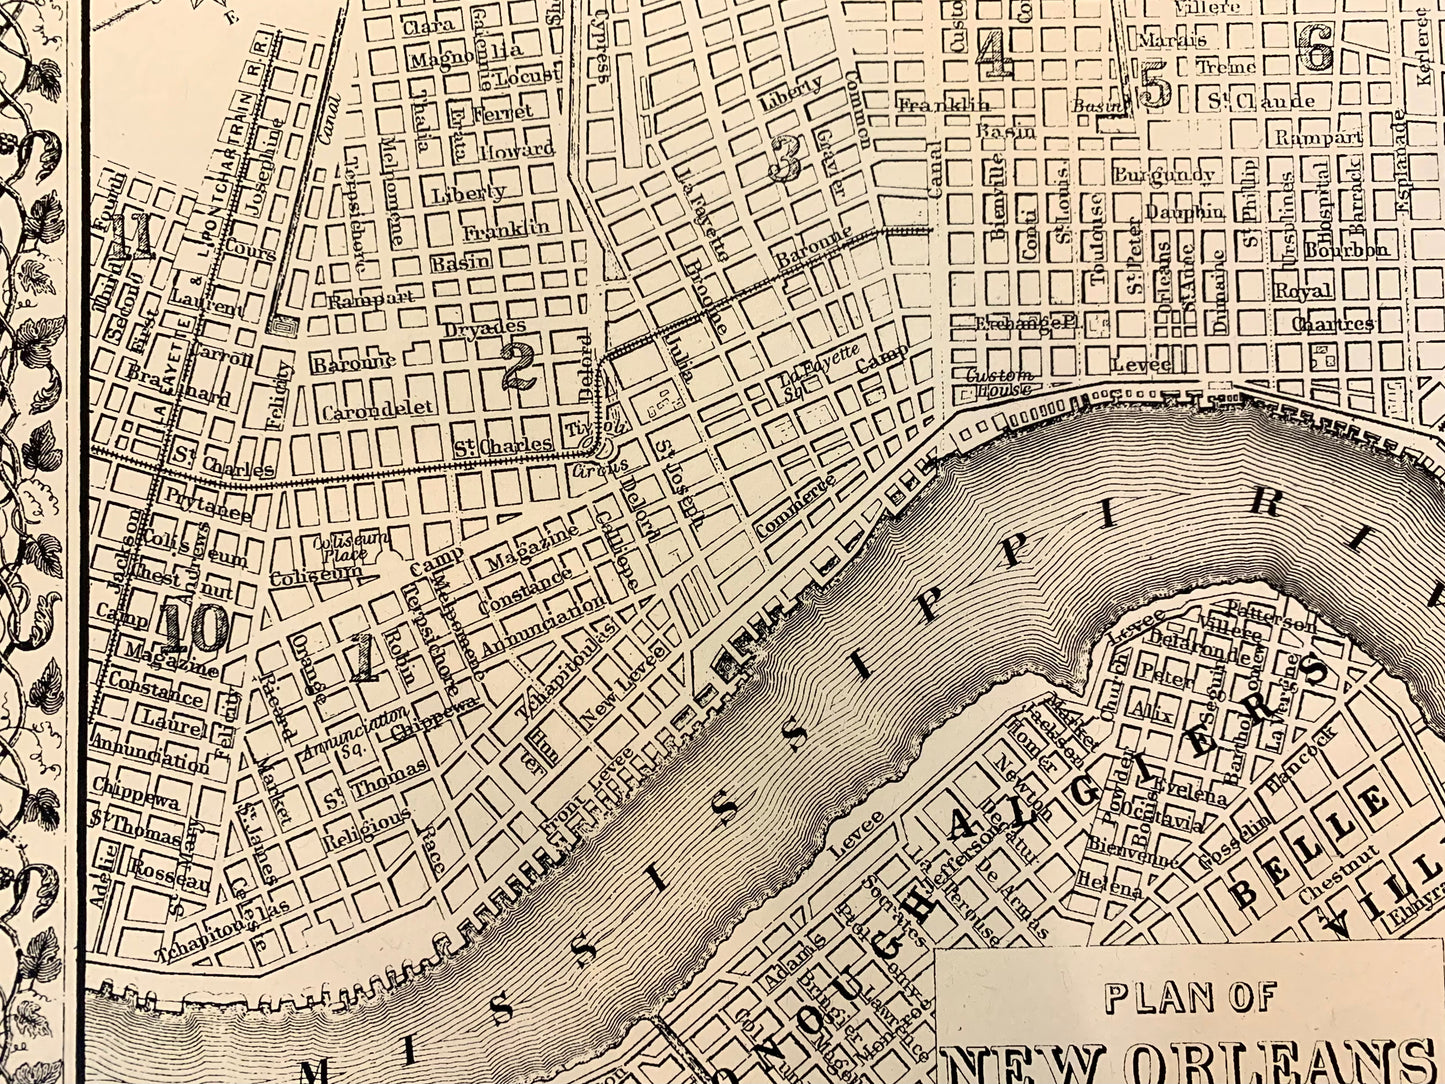 1870 PLAN OF NEW ORLEANS MAP PRINT